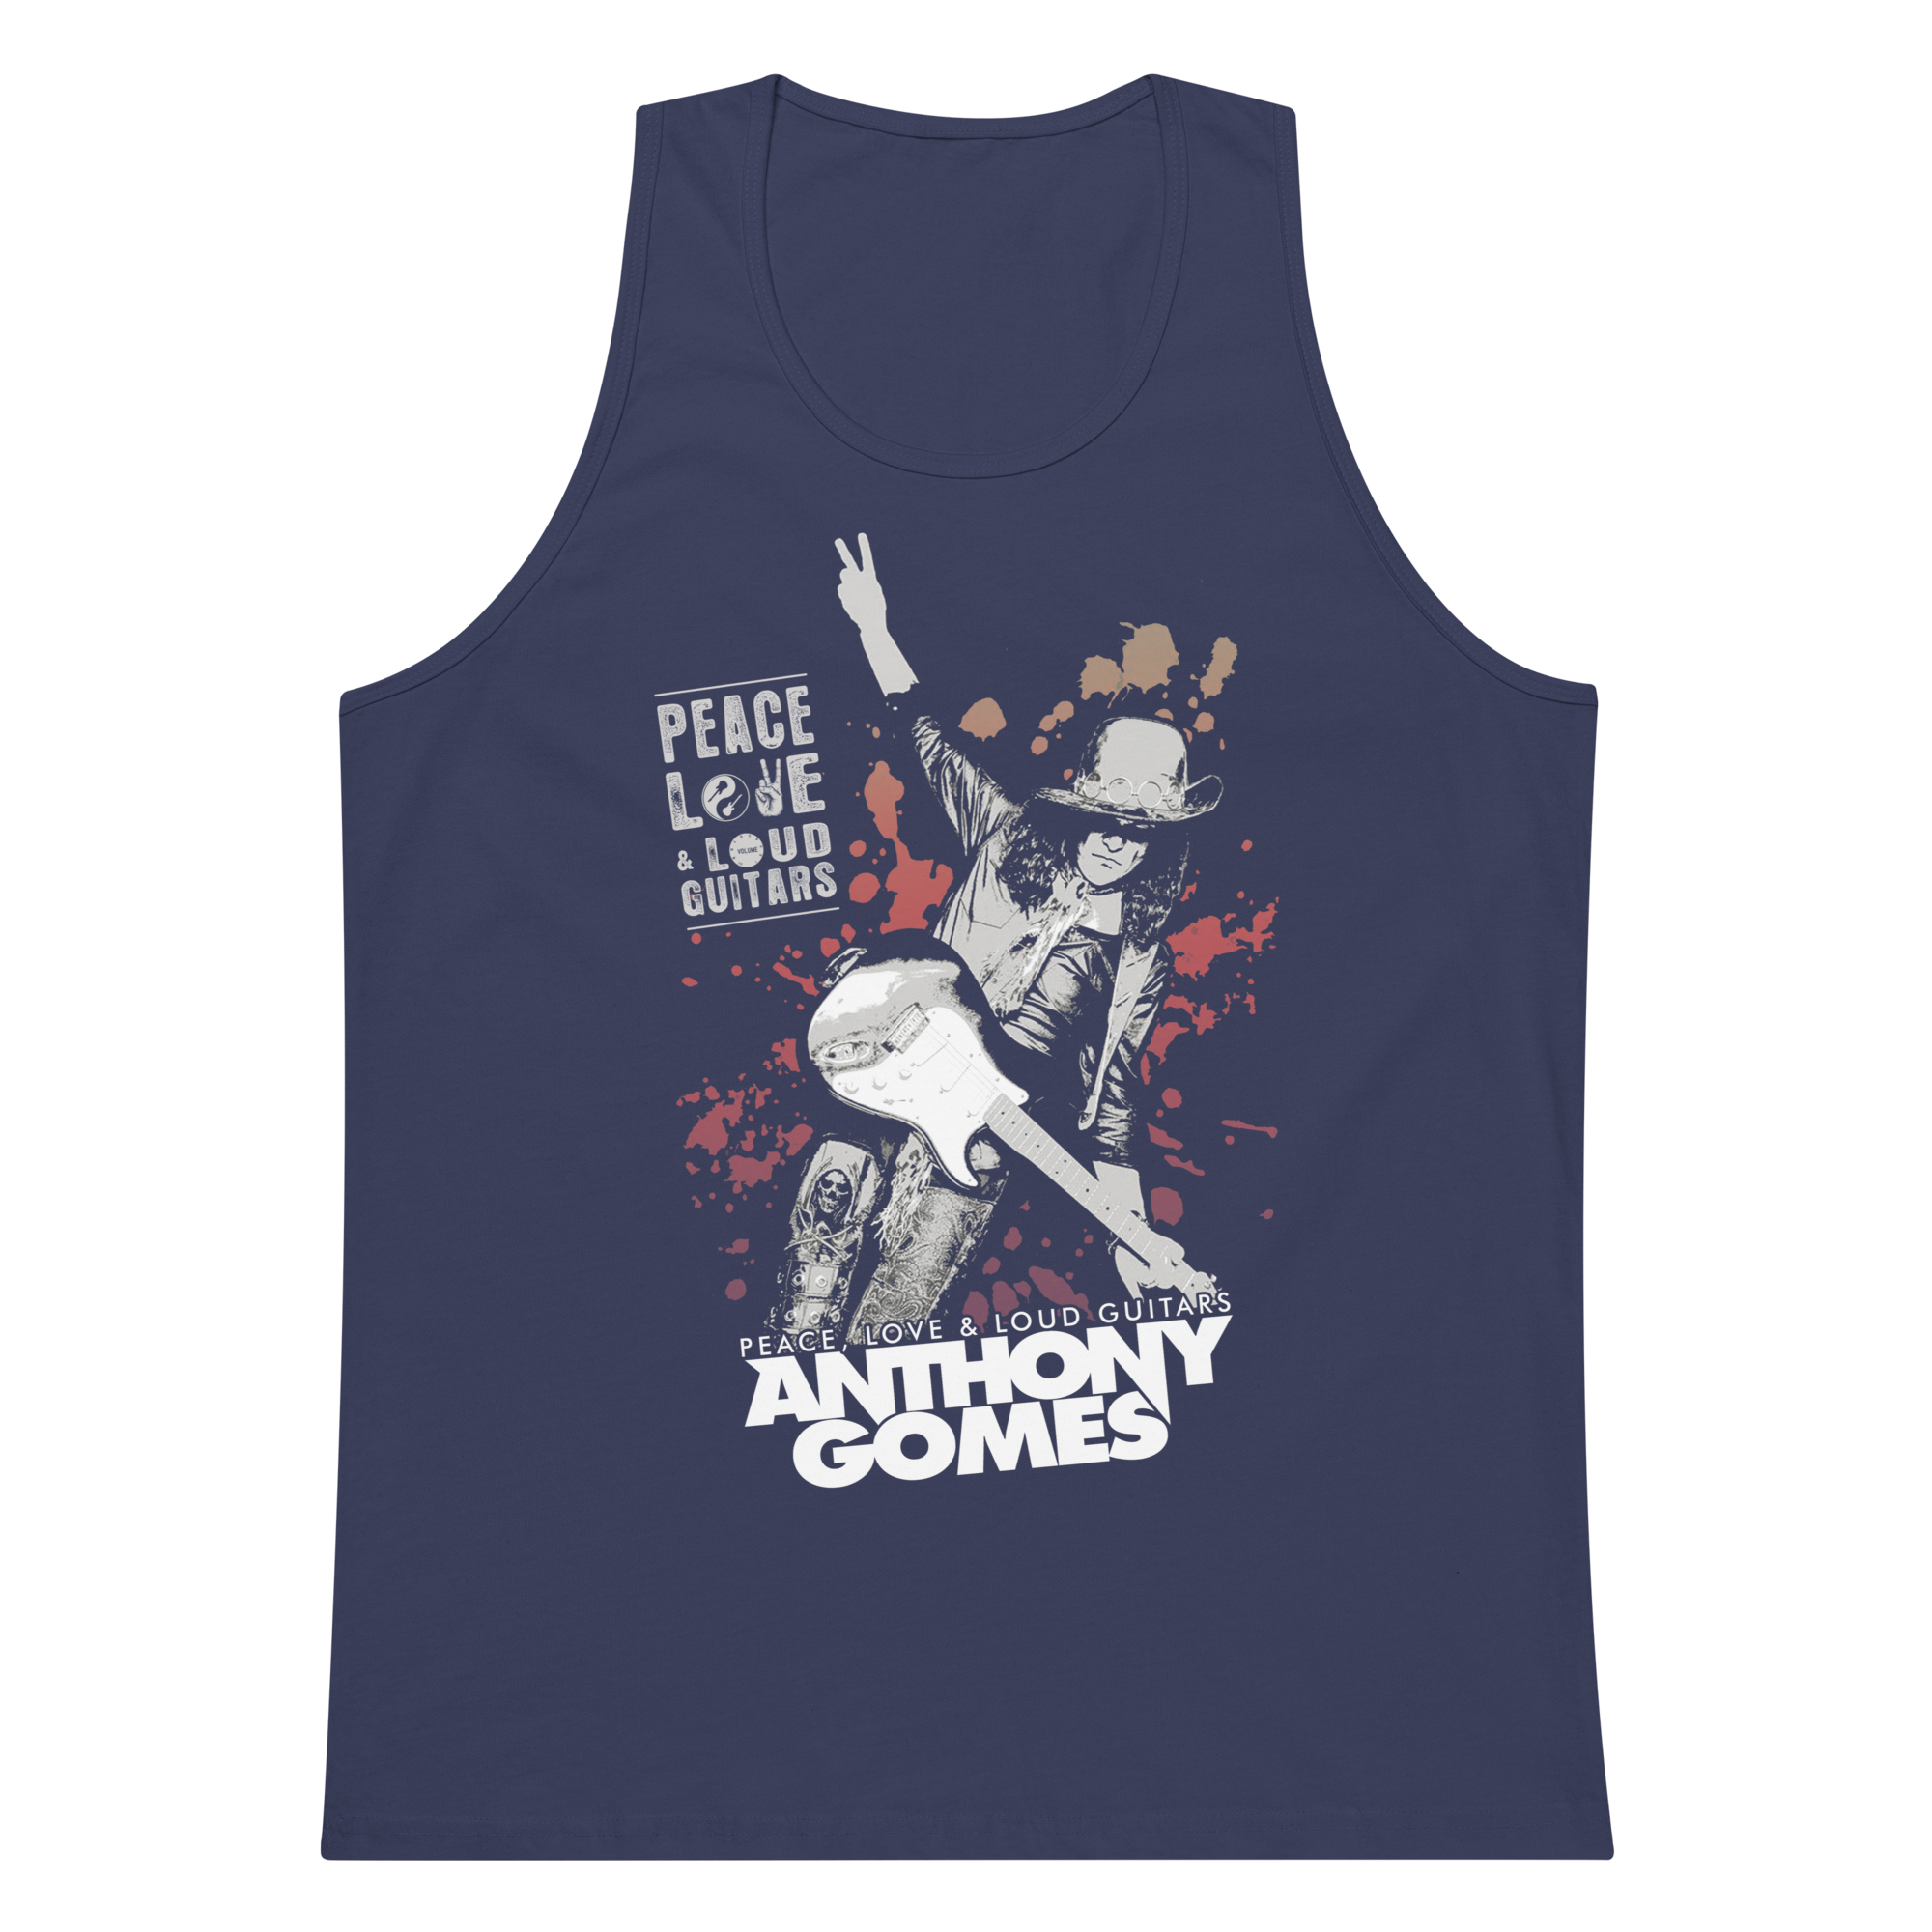 Men’s AG PLLG Tank Top - Available in 4 Colors (S-3XL)